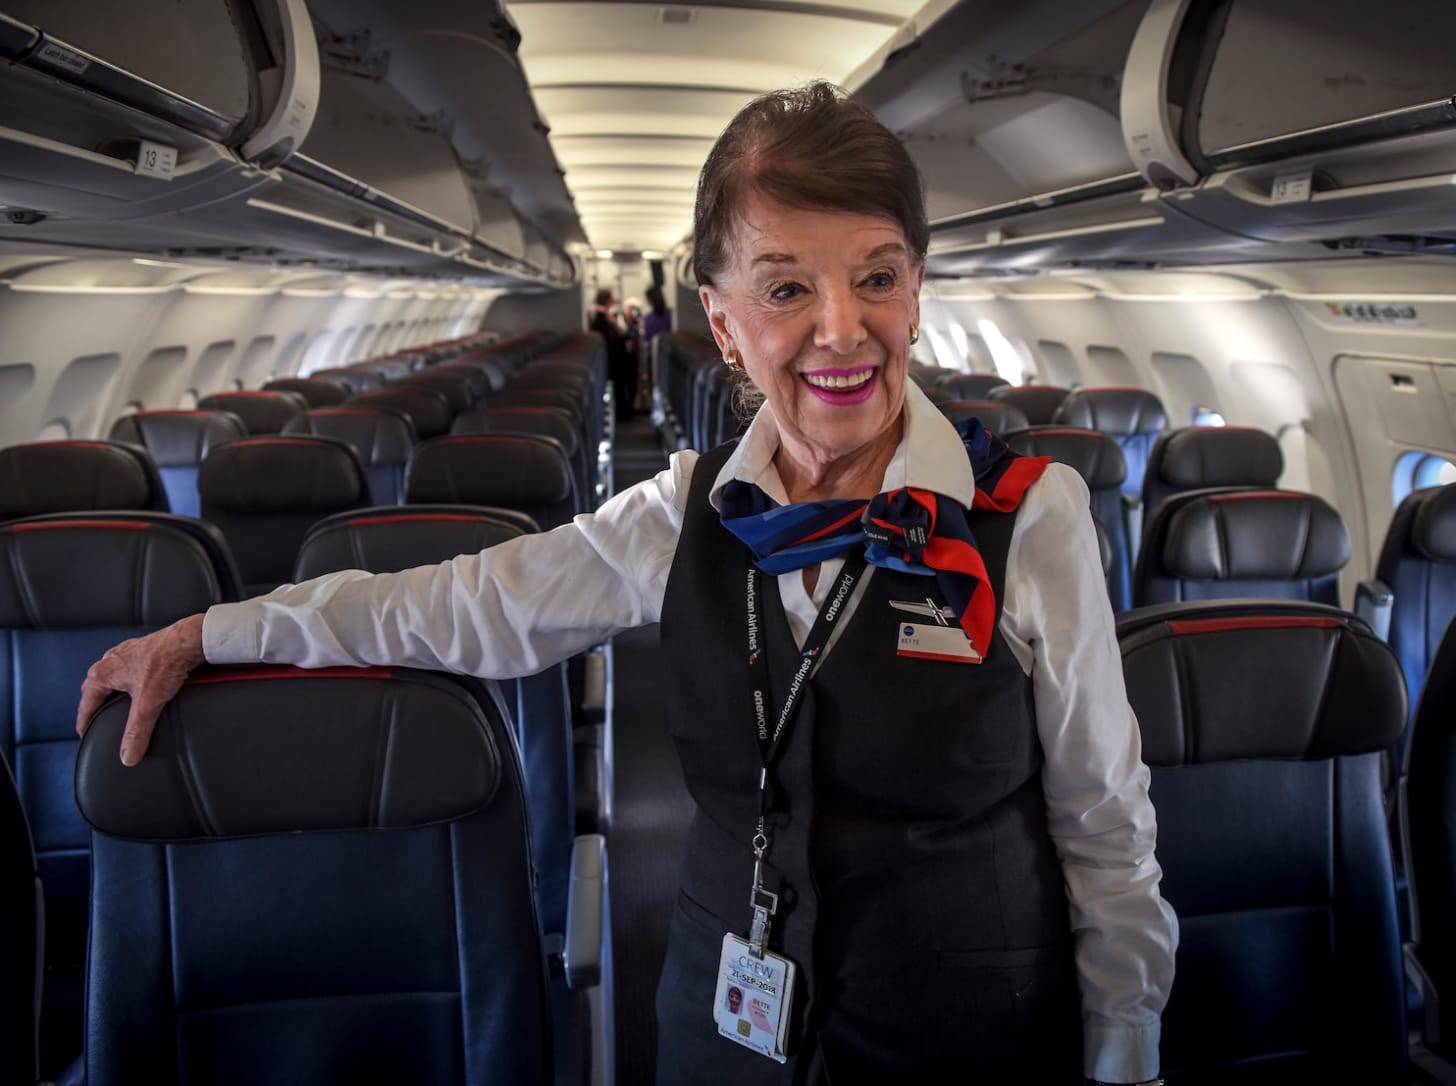 Meet the woman who's spent 60 years making the skies a little friendlier -  The Washington Post